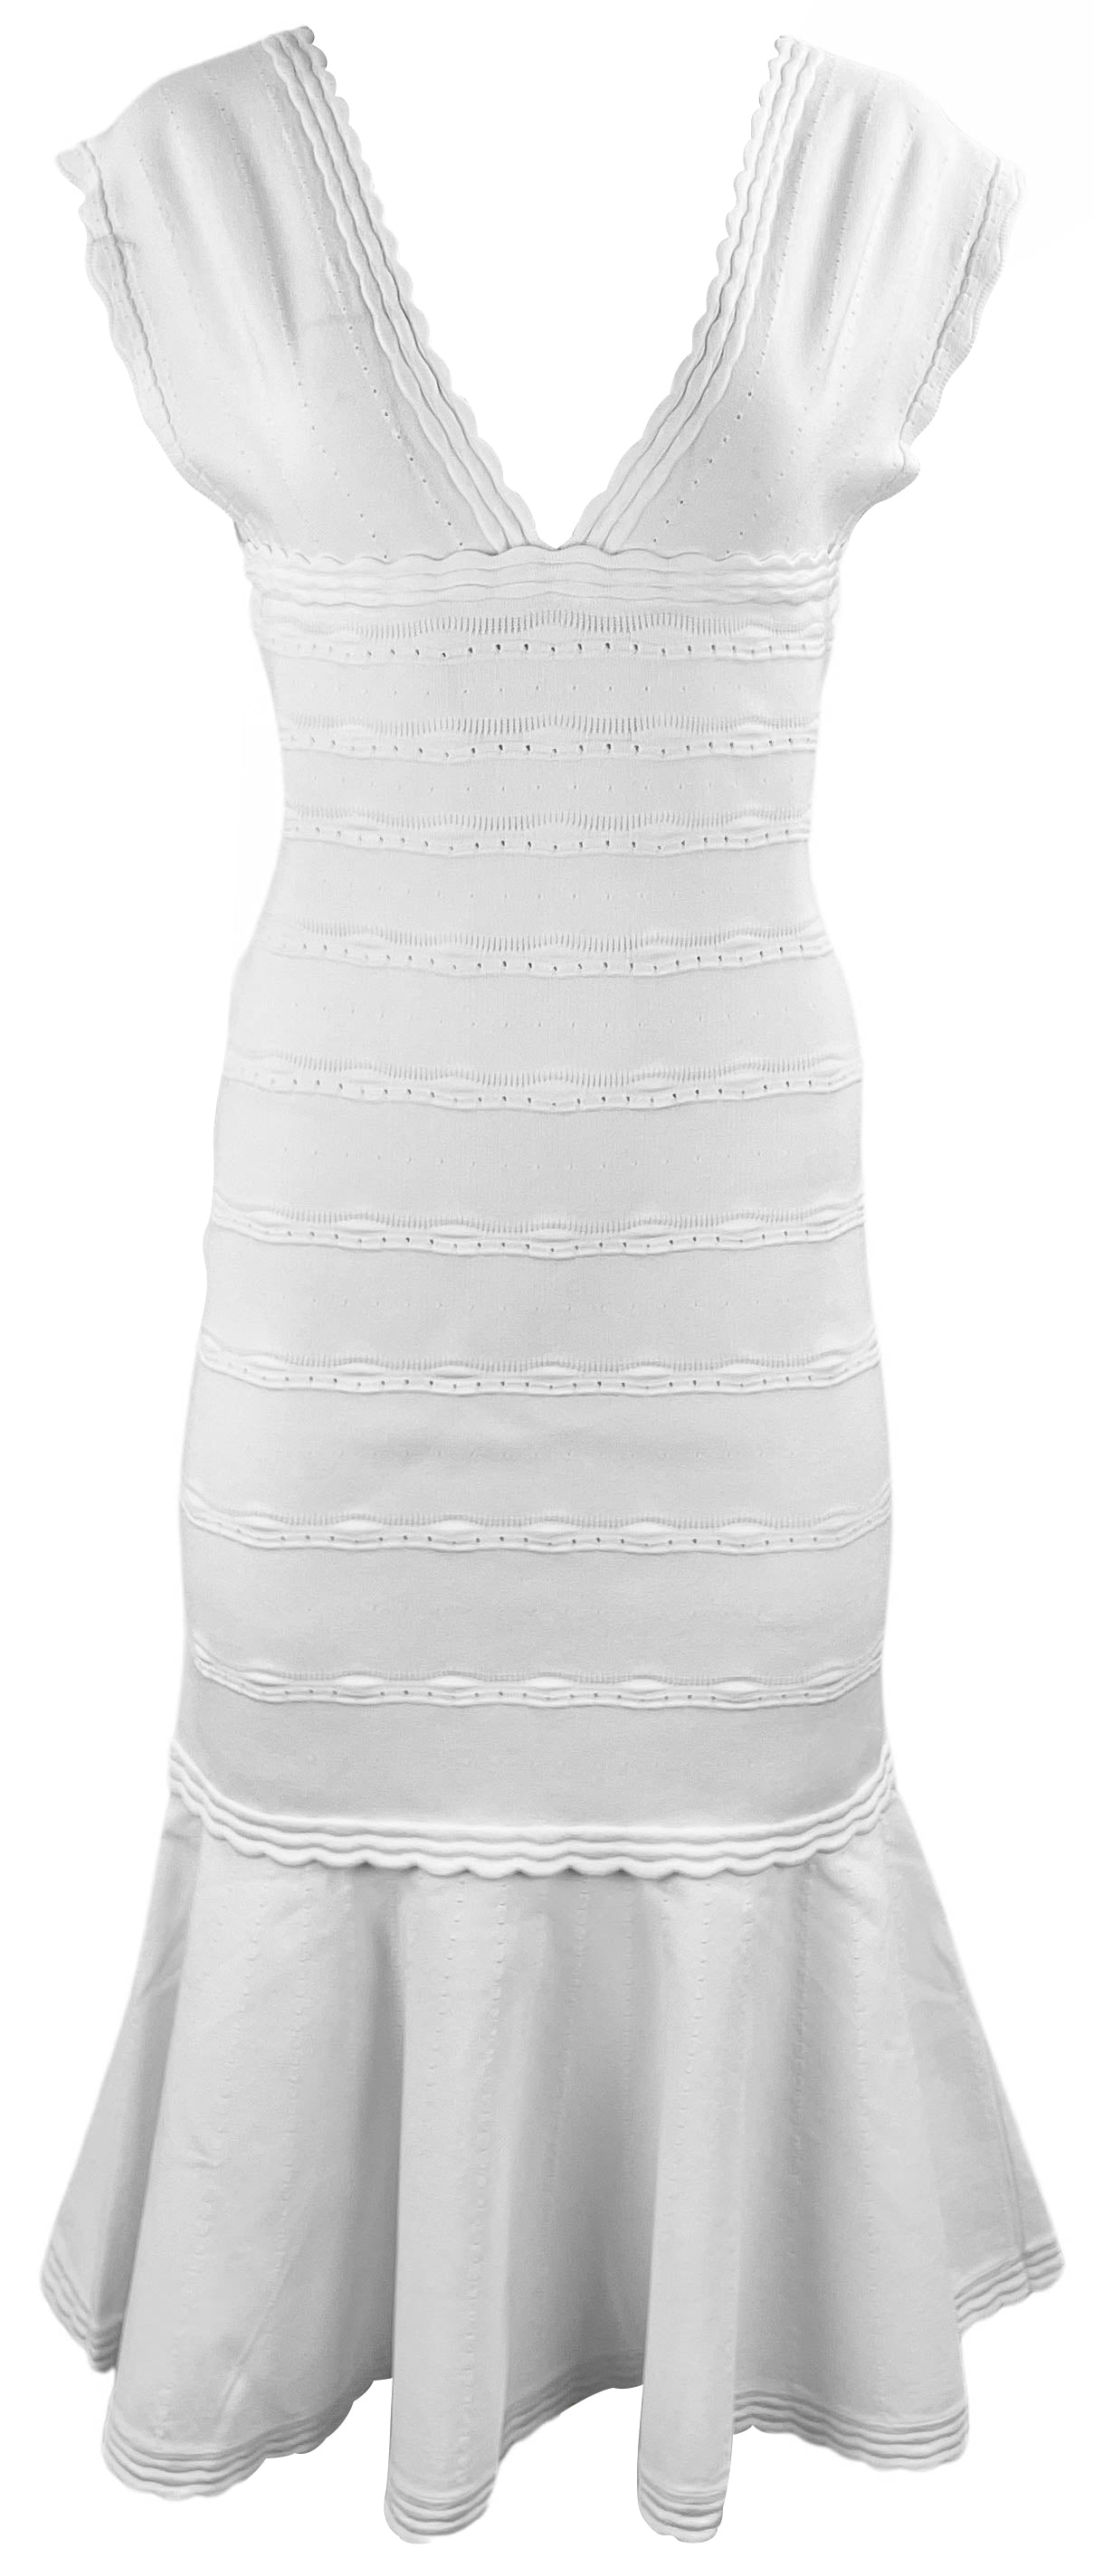 Victoria Beckham Sleeveless Flared Dress in White - Discounts on Victoria Beckham at UAL